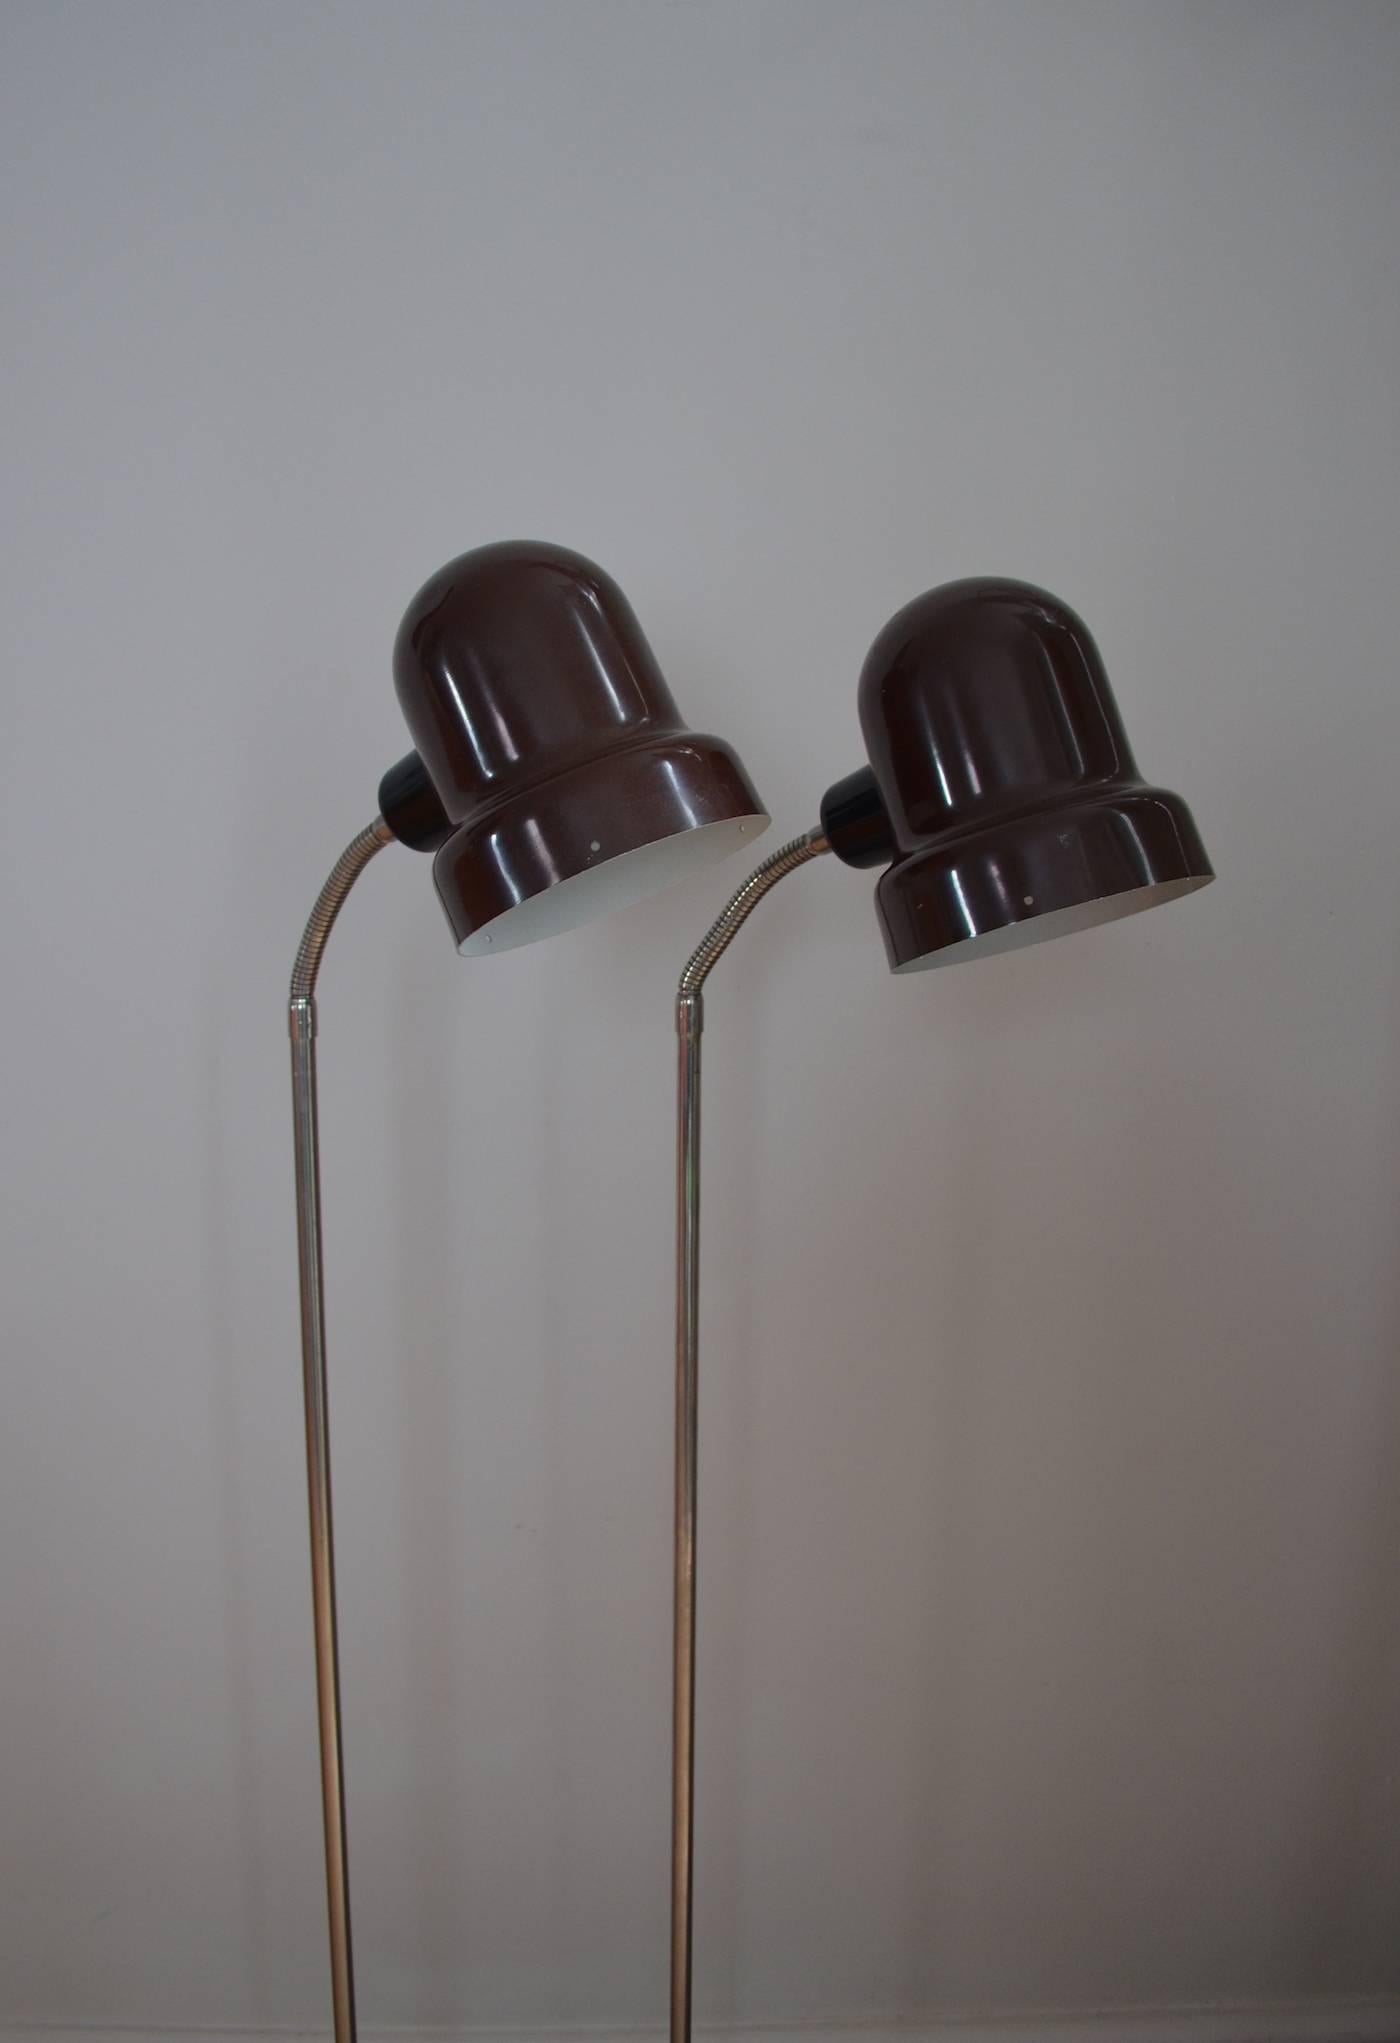 Pair of 1960s Adjustable Floor Lamps In Good Condition For Sale In London, Greater London